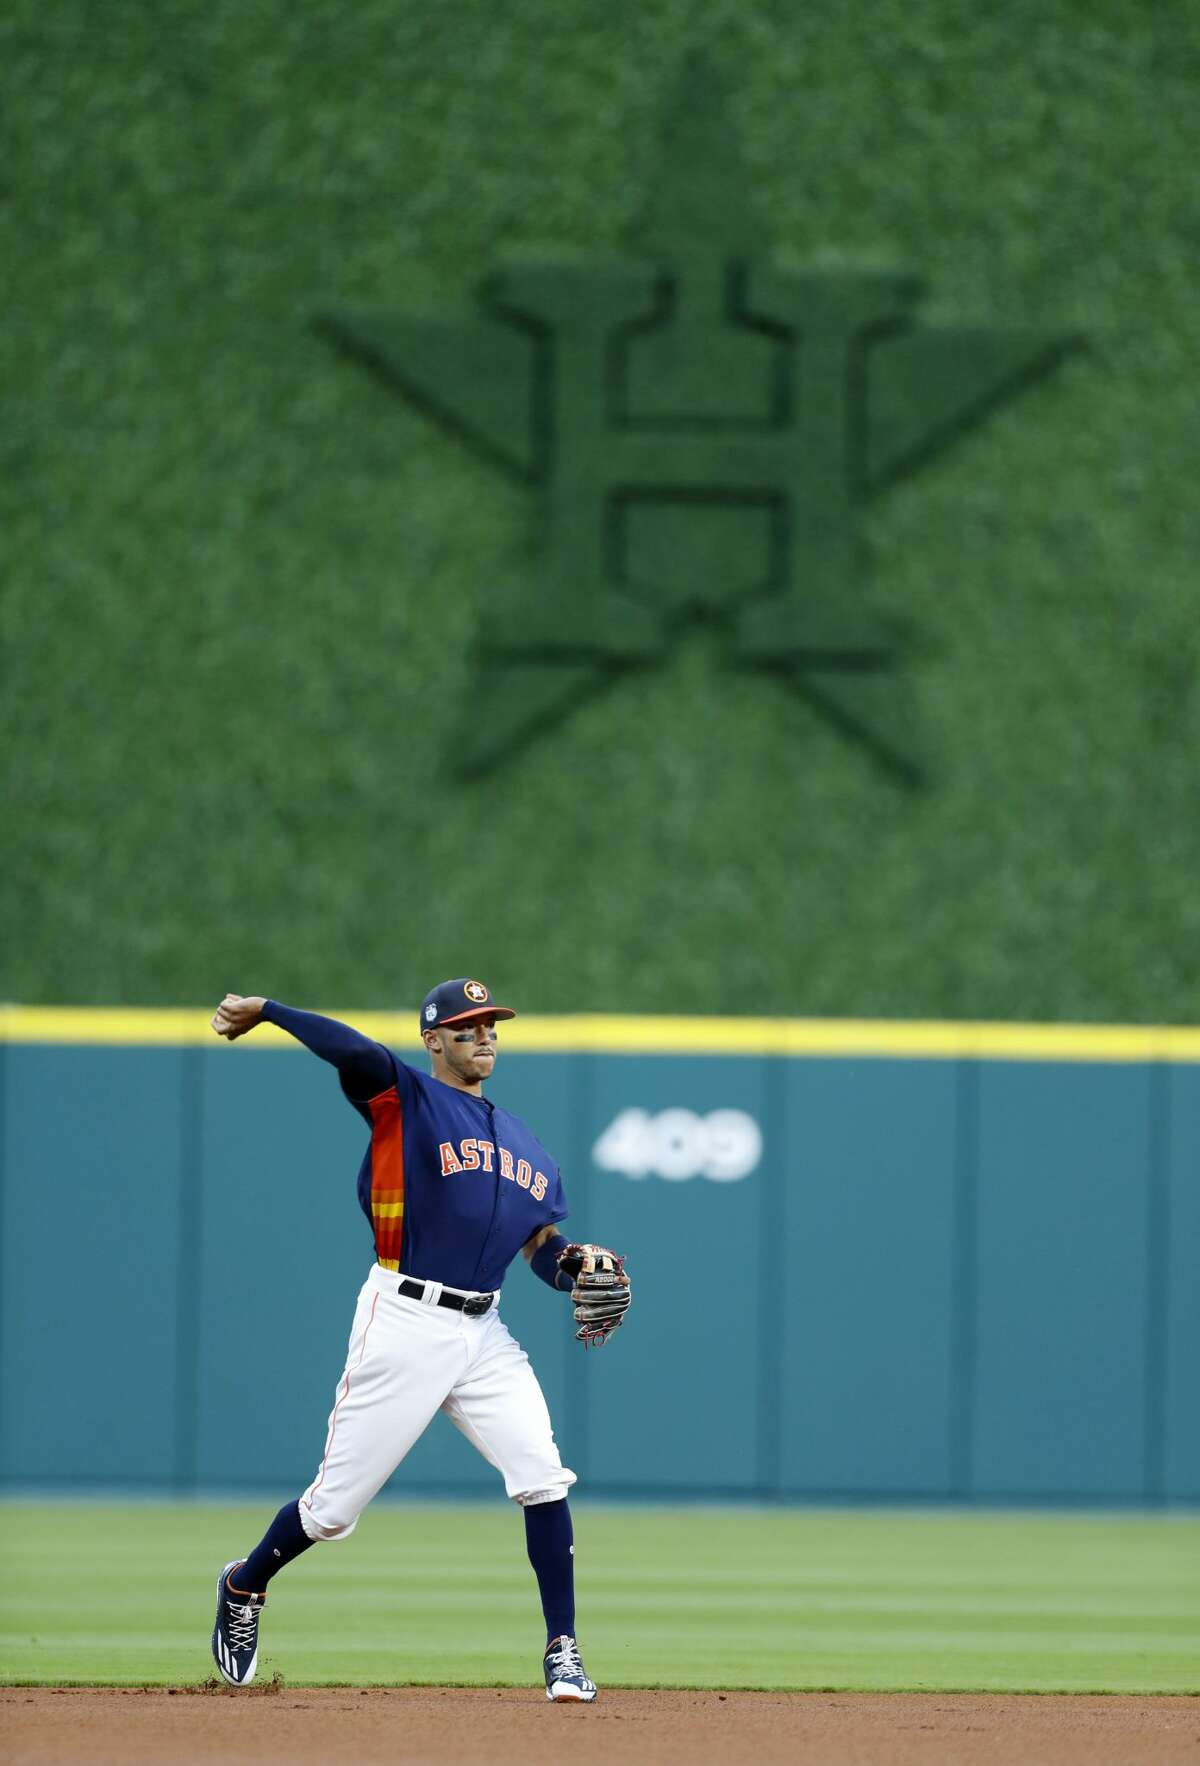 Houston Astros shortstop Carlos Correa (1) warms up with the new batter's eye in the background during the first inning of an MLB exhibition game at Minute Maid Park, Thursday, March 30, 2017, in Houston. ( Karen Warren / Houston Chronicle )